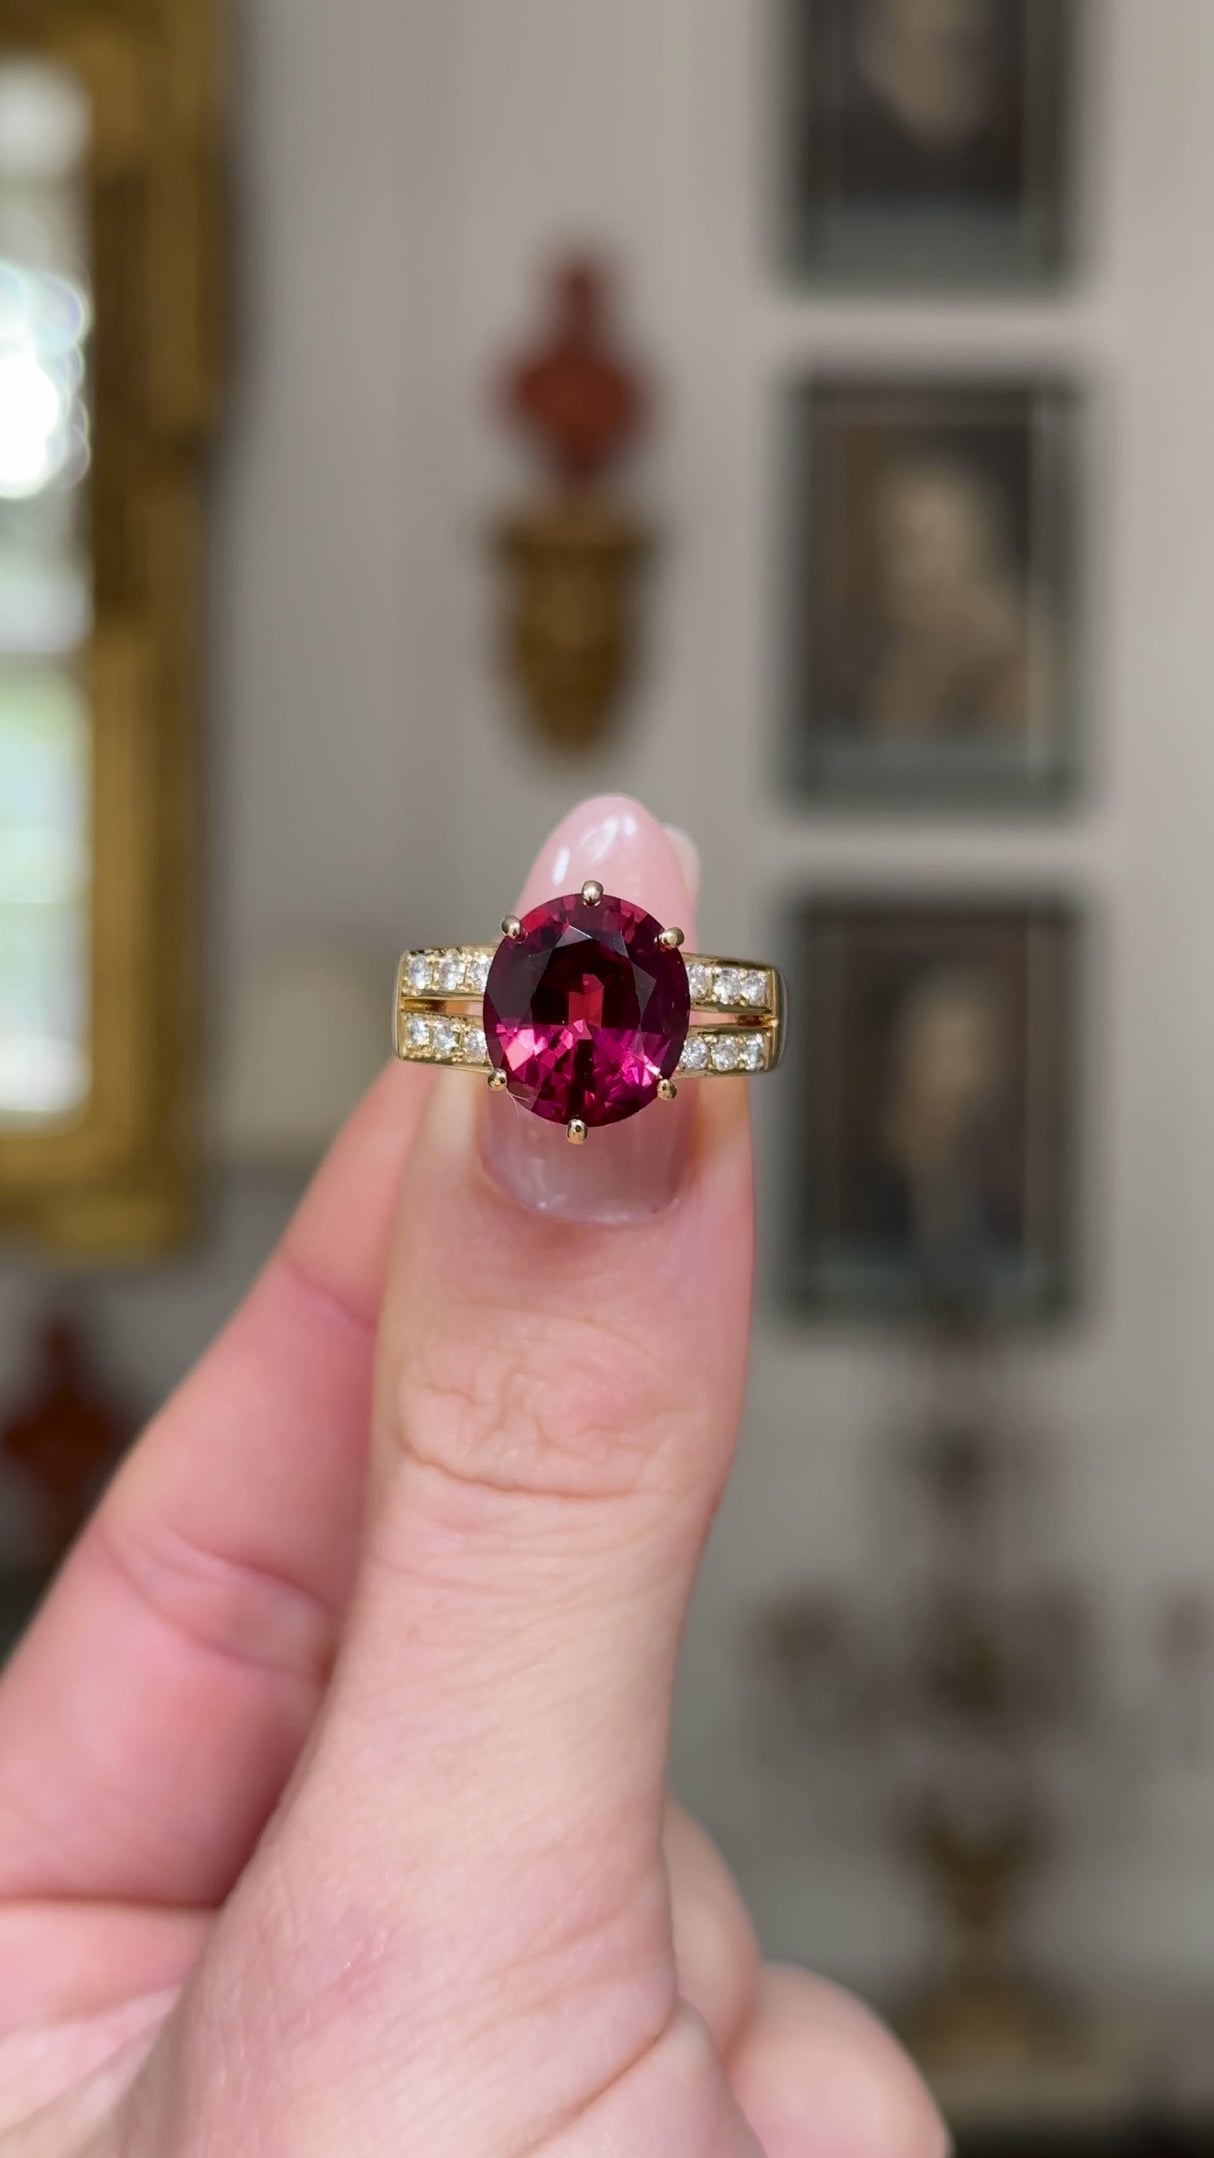 Red tourmaline and diamond cocktail ring, held in fingers and rotated to give perspective, front view. 